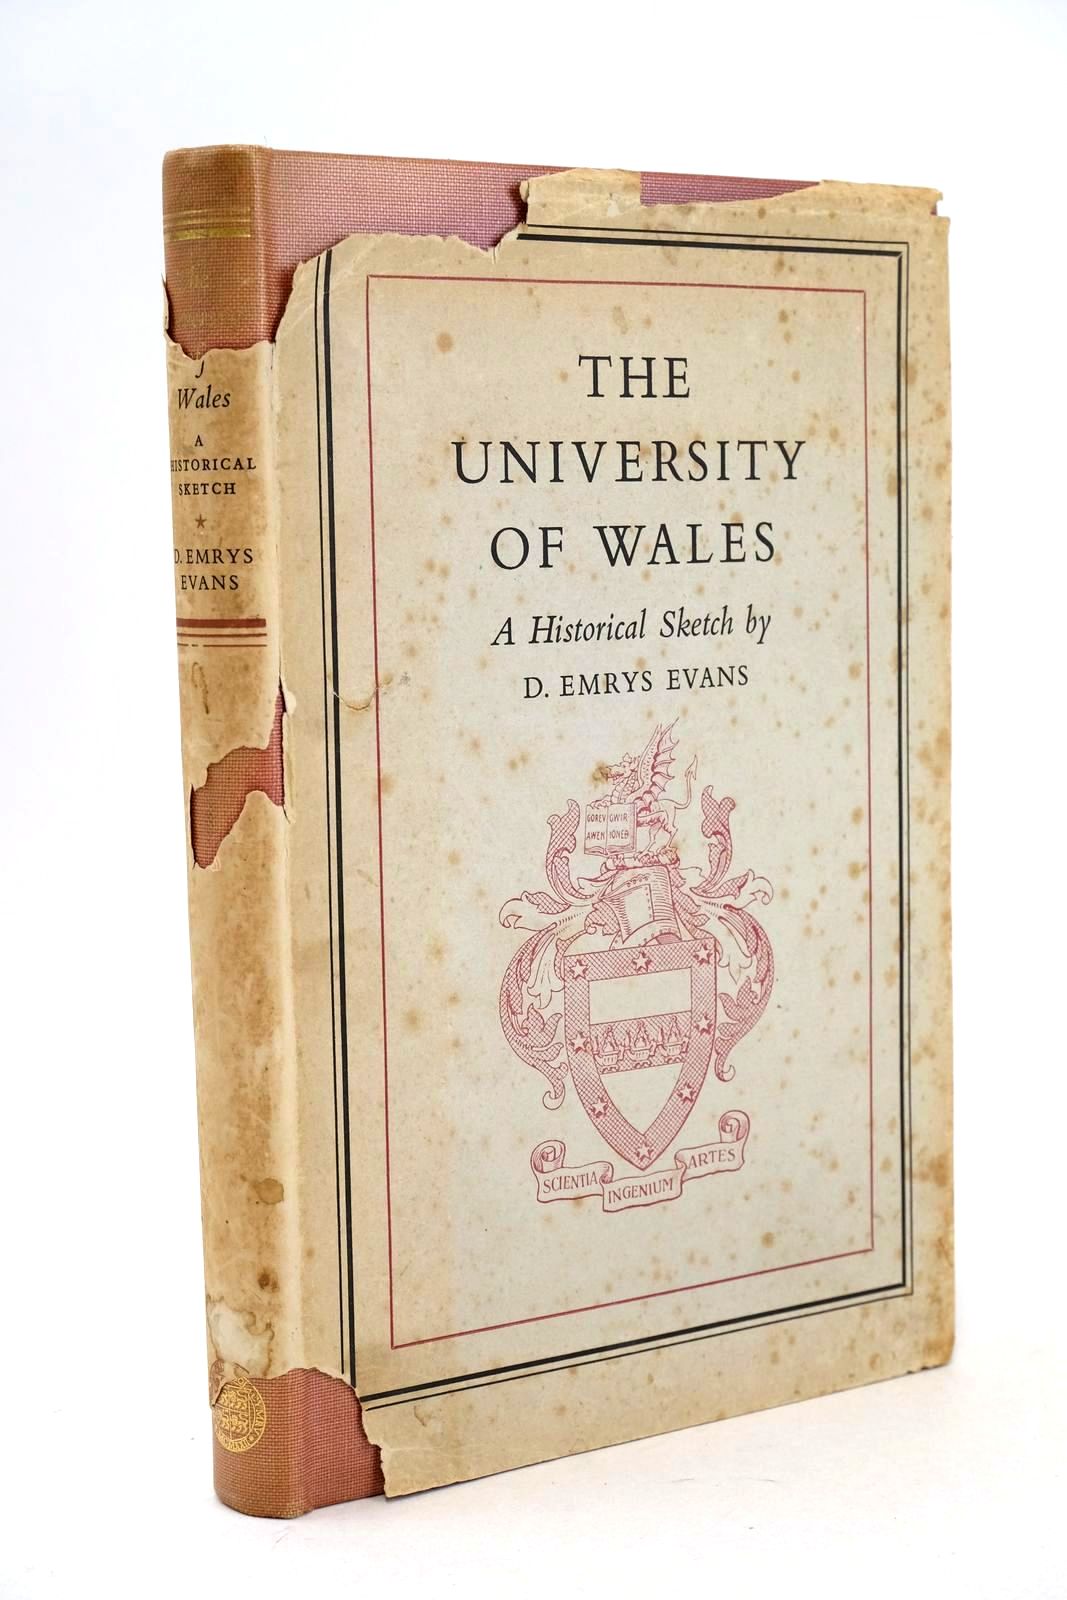 Photo of THE UNIVERSITY OF WALES written by Evans, D. Emrys published by University of Wales (STOCK CODE: 1326389)  for sale by Stella & Rose's Books